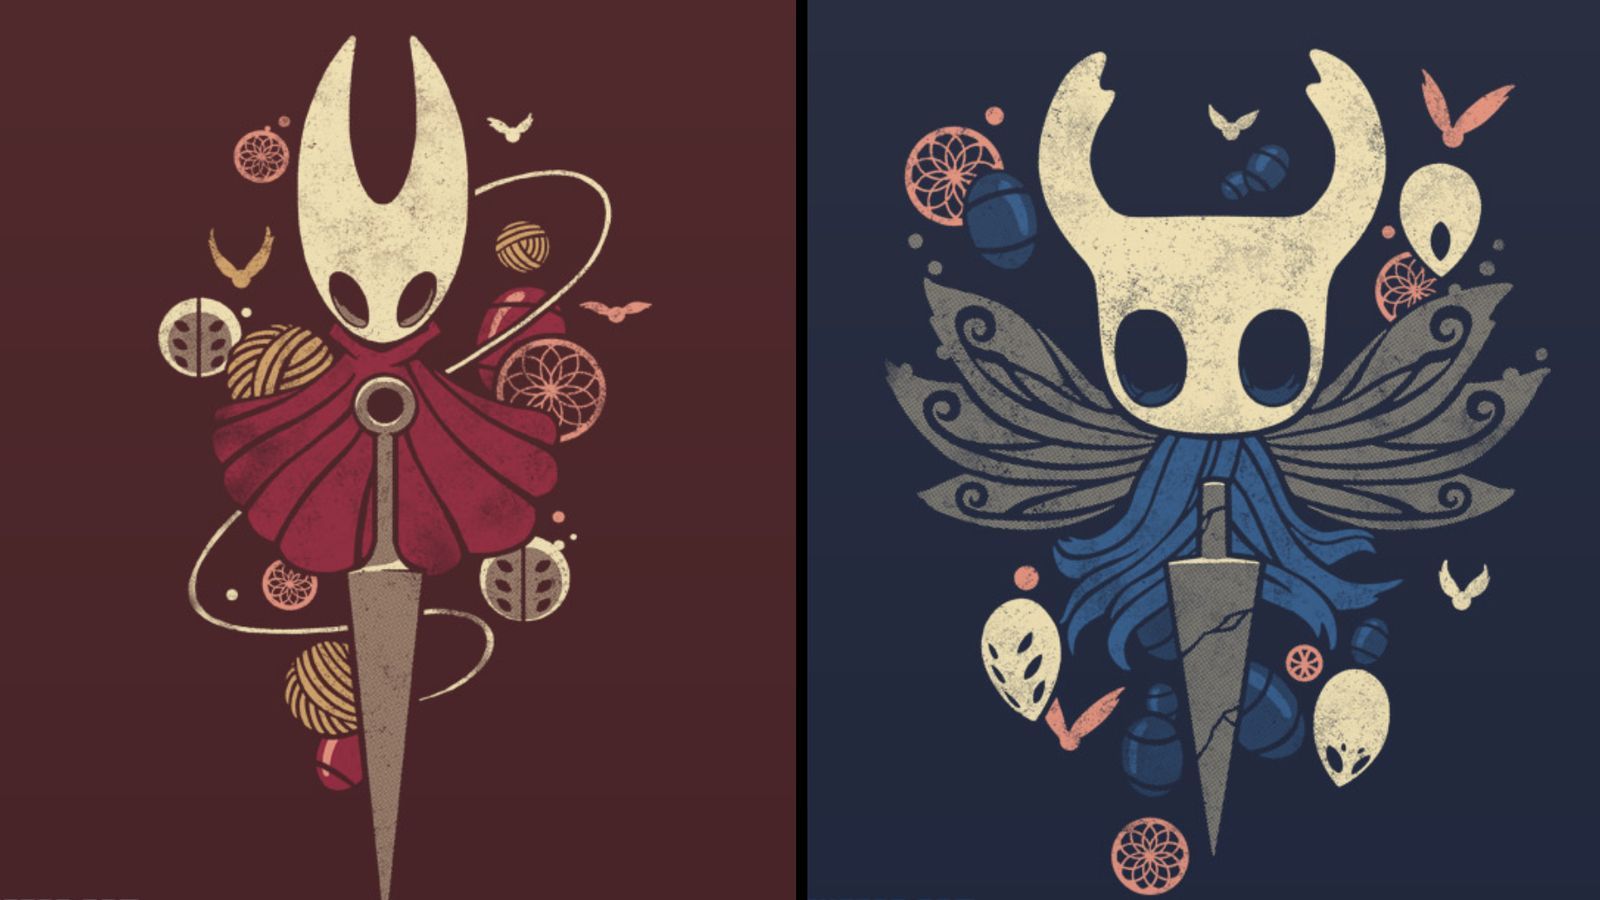 Free download Hollow Knight and Hornet Art in 2019 Knight Hollow night [1600x900] for your Desktop, Mobile & Tablet. Explore Hollow Knight, Five Knights Wallpaper. Knights Wallpaper, Hollow Wallpaper, London Knights Wallpaper